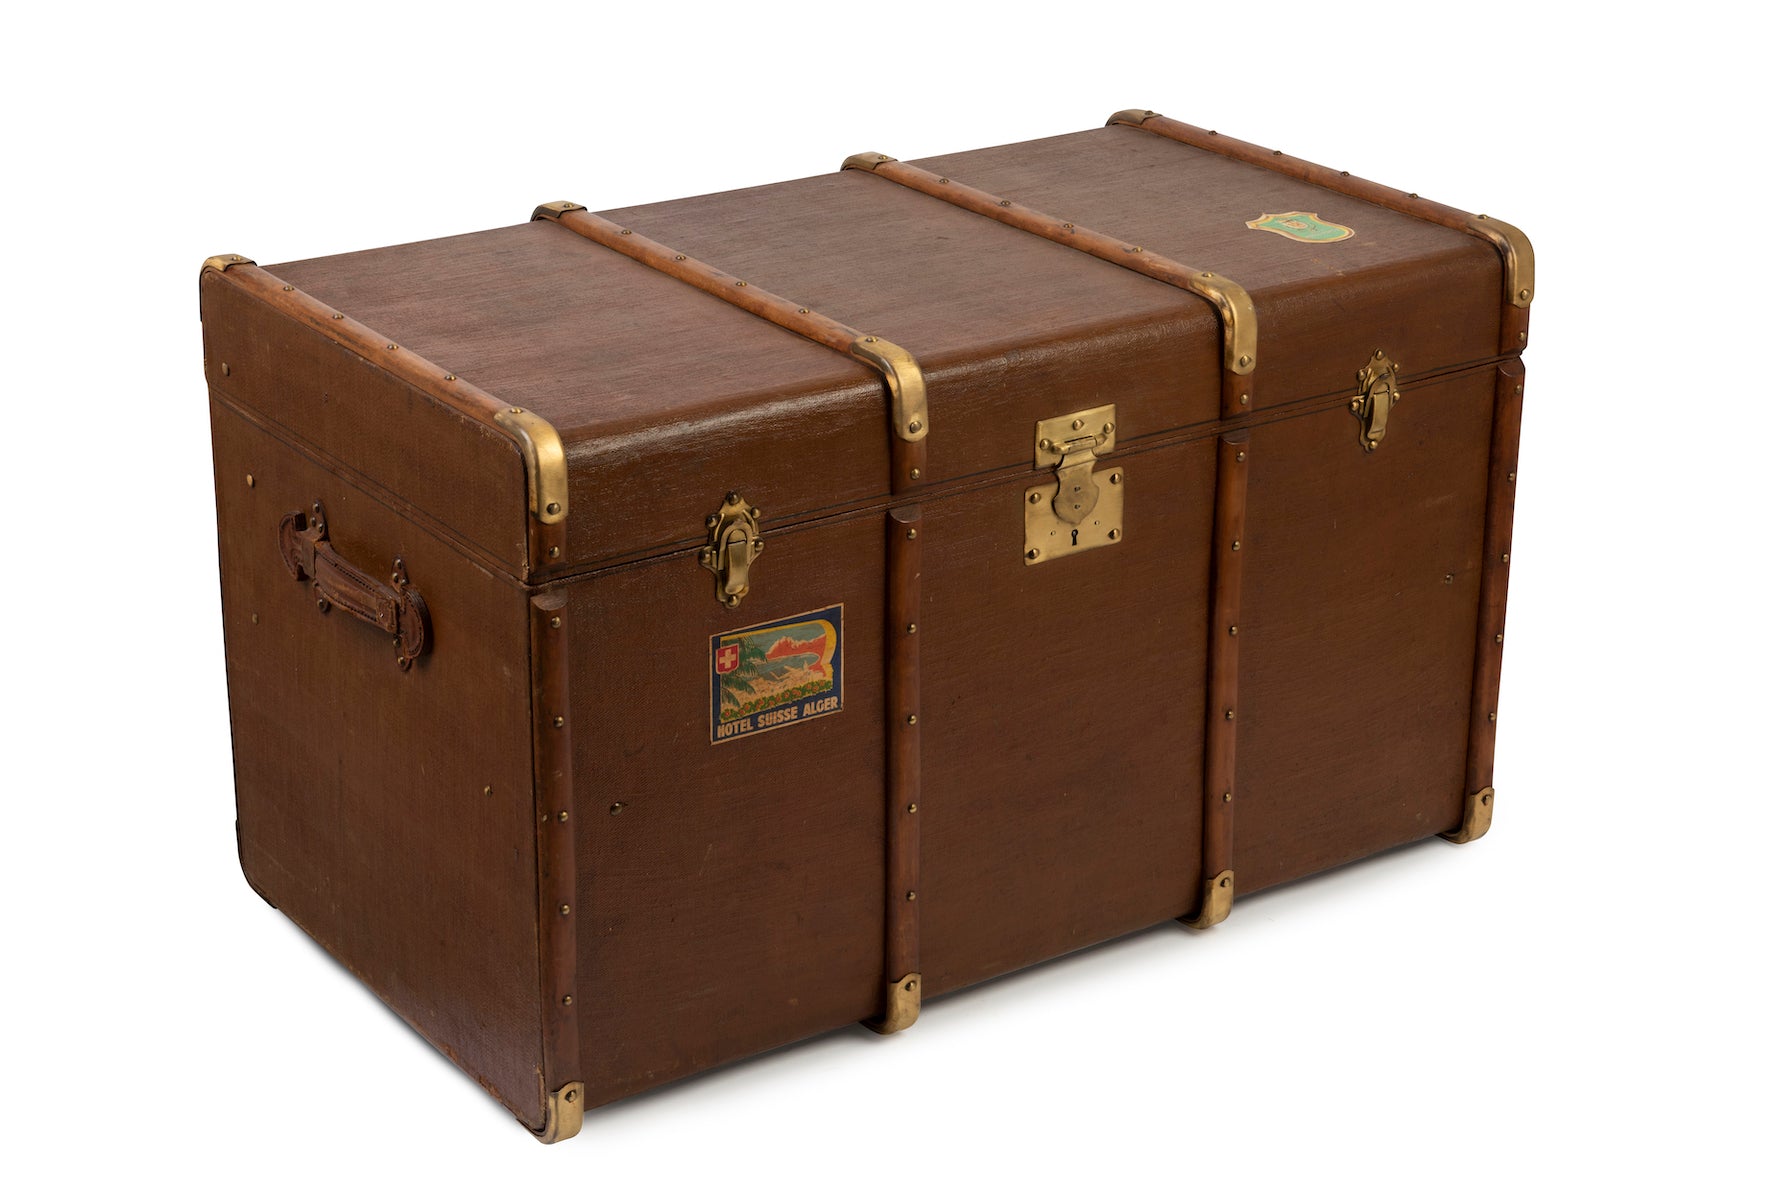 SOLD A brass and timber-bound tan painted canvas steamer trunk, French Circa 1900